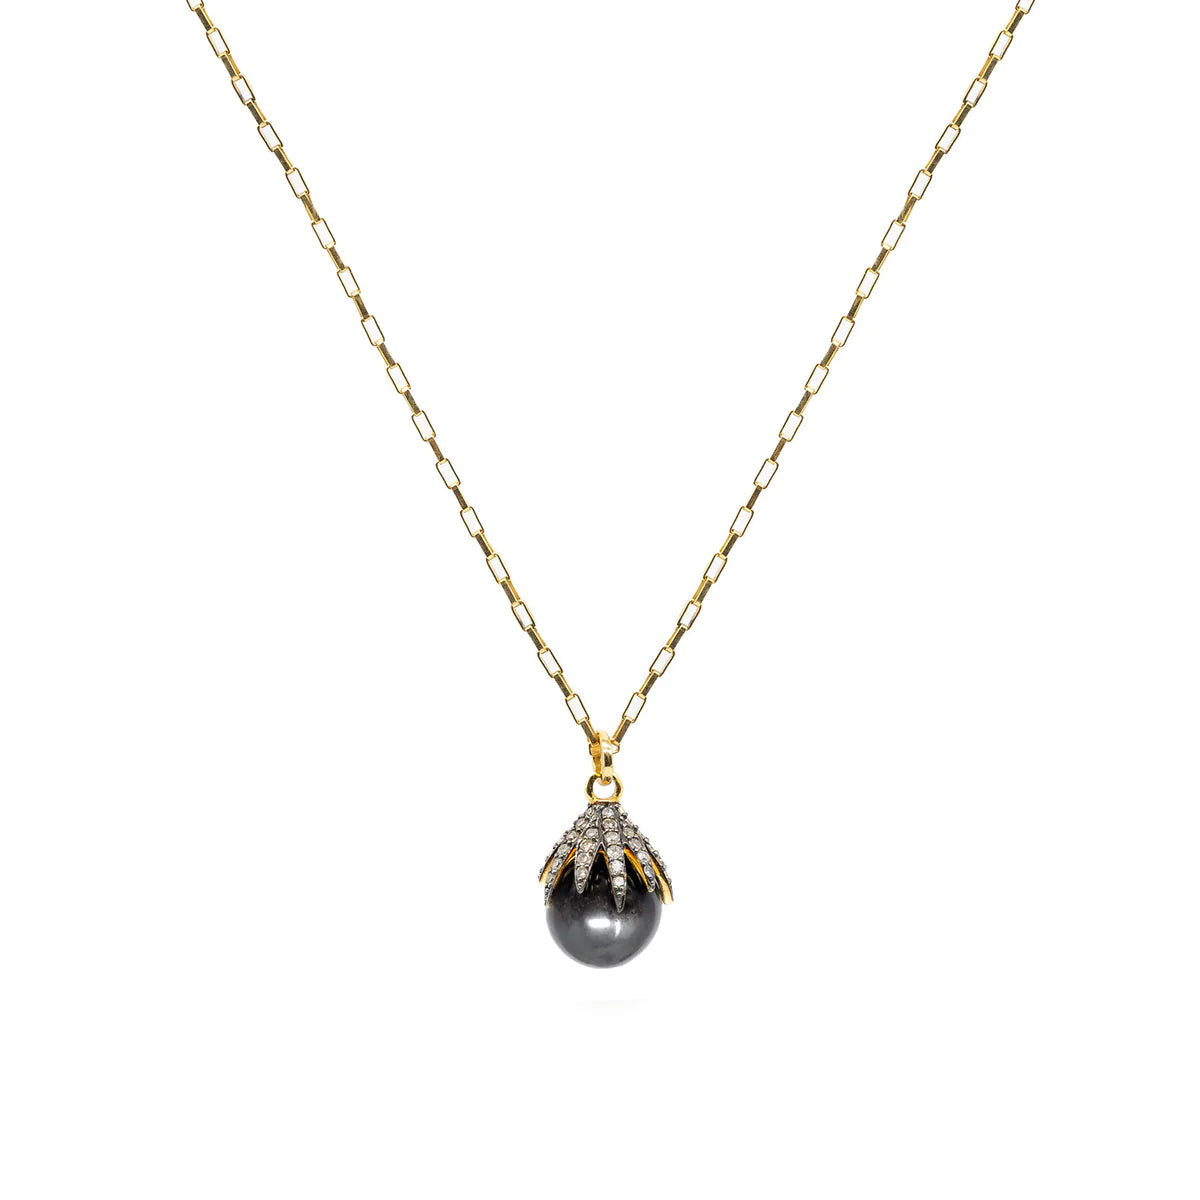 Hematite grey drop necklace held by a pave diamond claw setting on a gold plated belcher chain